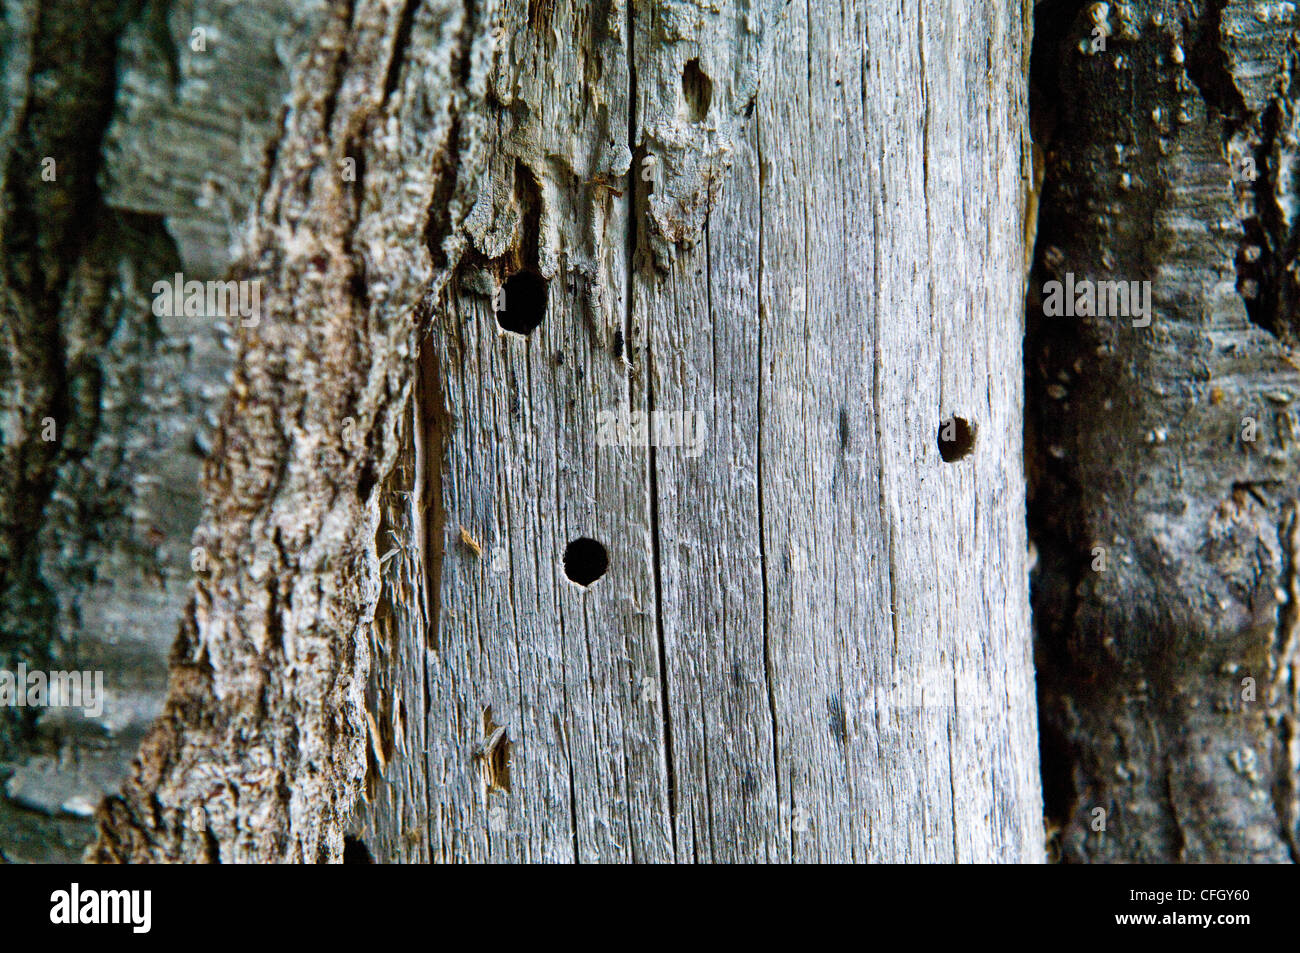 Holes in a tree trunk made by wood boring insects possibly wood wasps. Stock Photo